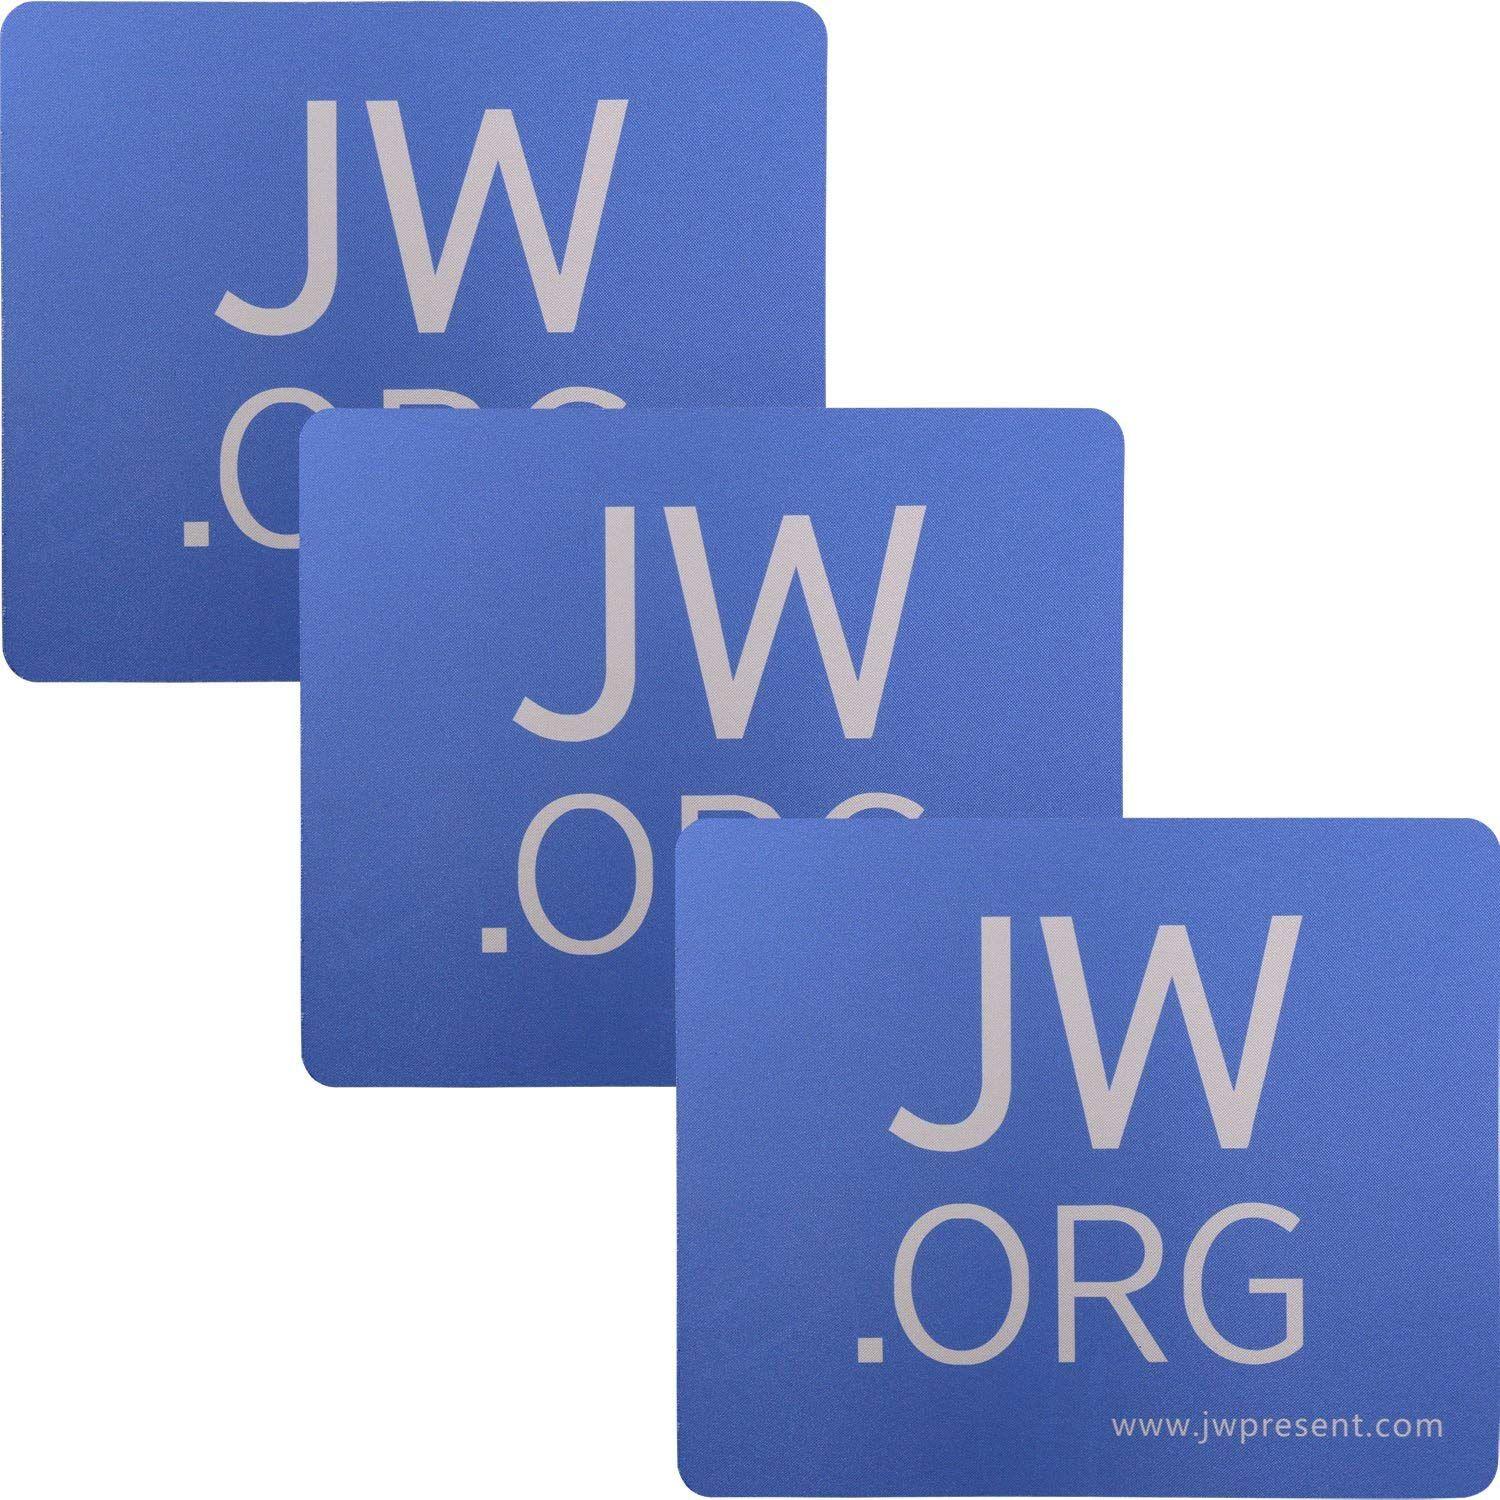 Jw.org Logo - Amazon.com: Mouse Pad Mat Perfect Gift for JW.org Jehovah's ...